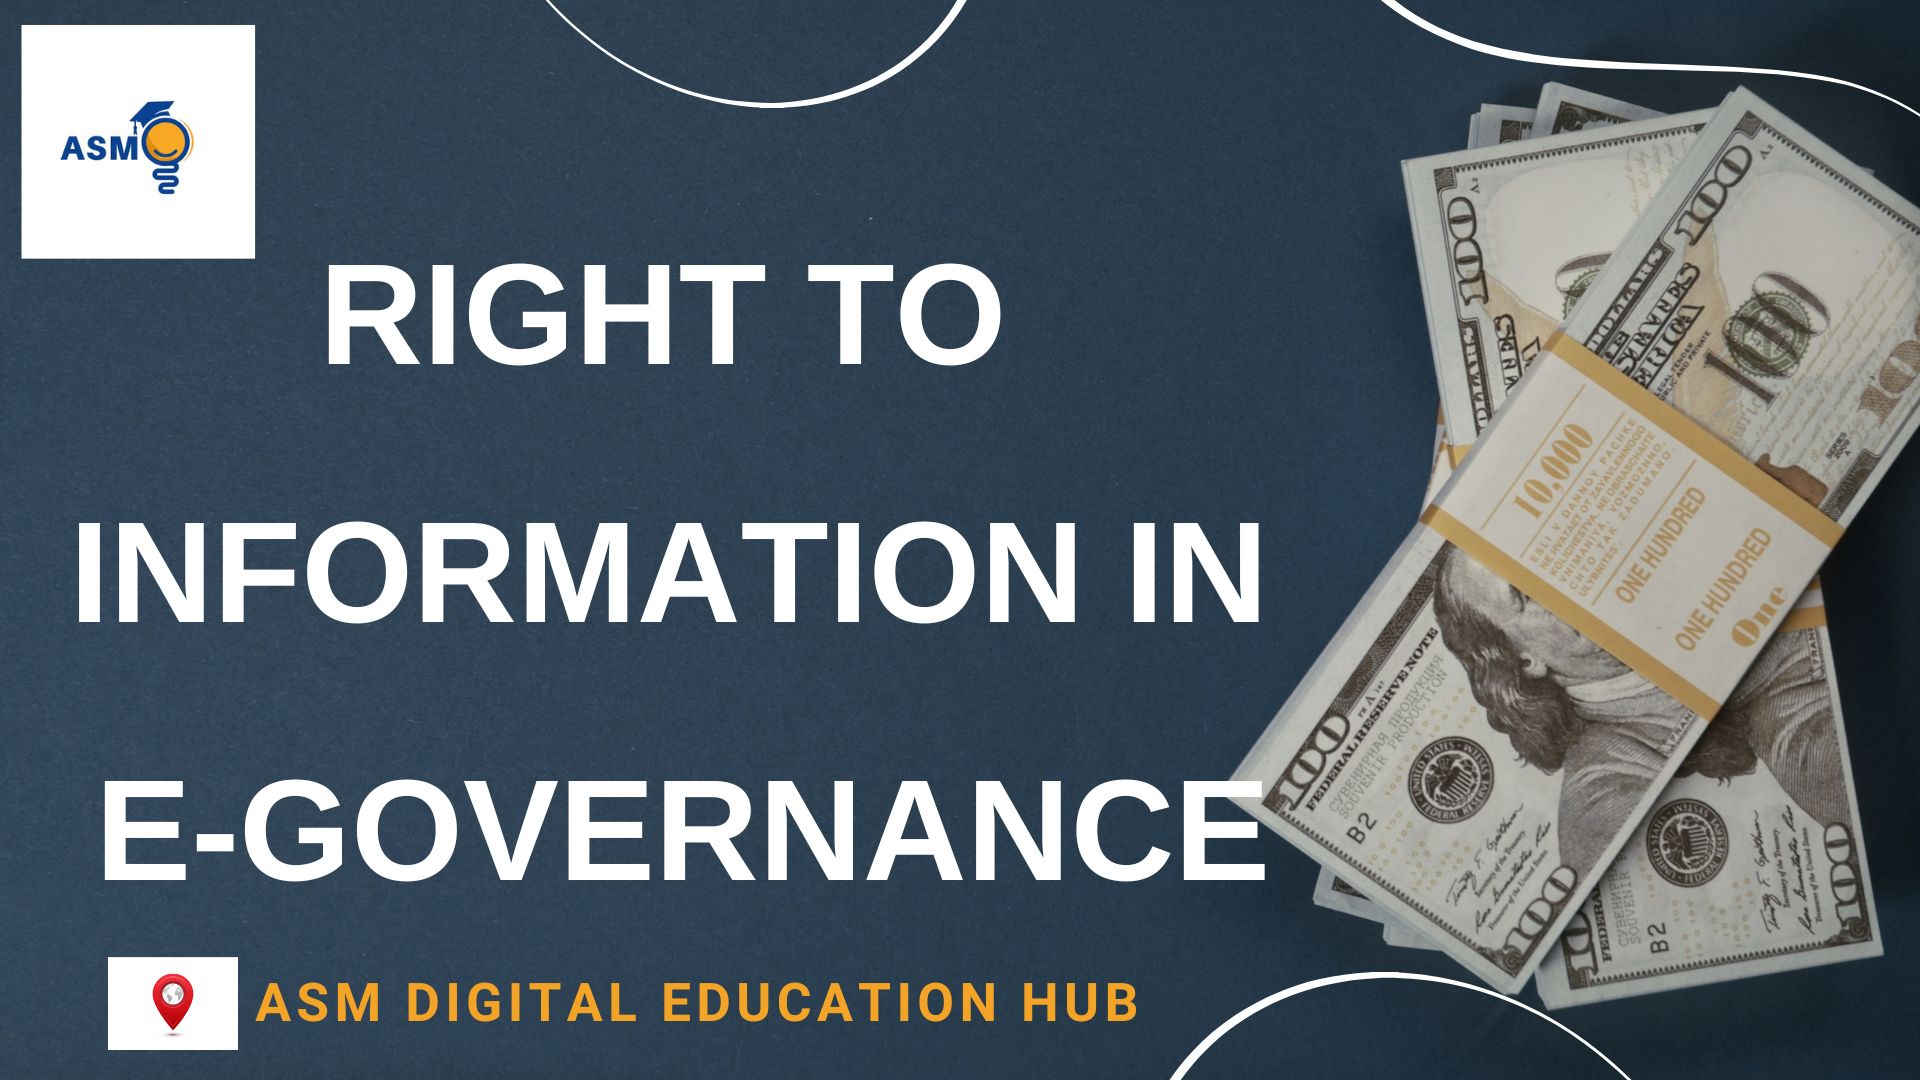 • How to file an RTI application for e-governance issues, • Does RTI apply to all e-governance services?, • The future of RTI in a digital governance environment, • Overcoming limitations of RTI in e-governance, • Balancing transparency and security with RTI in e-governance,